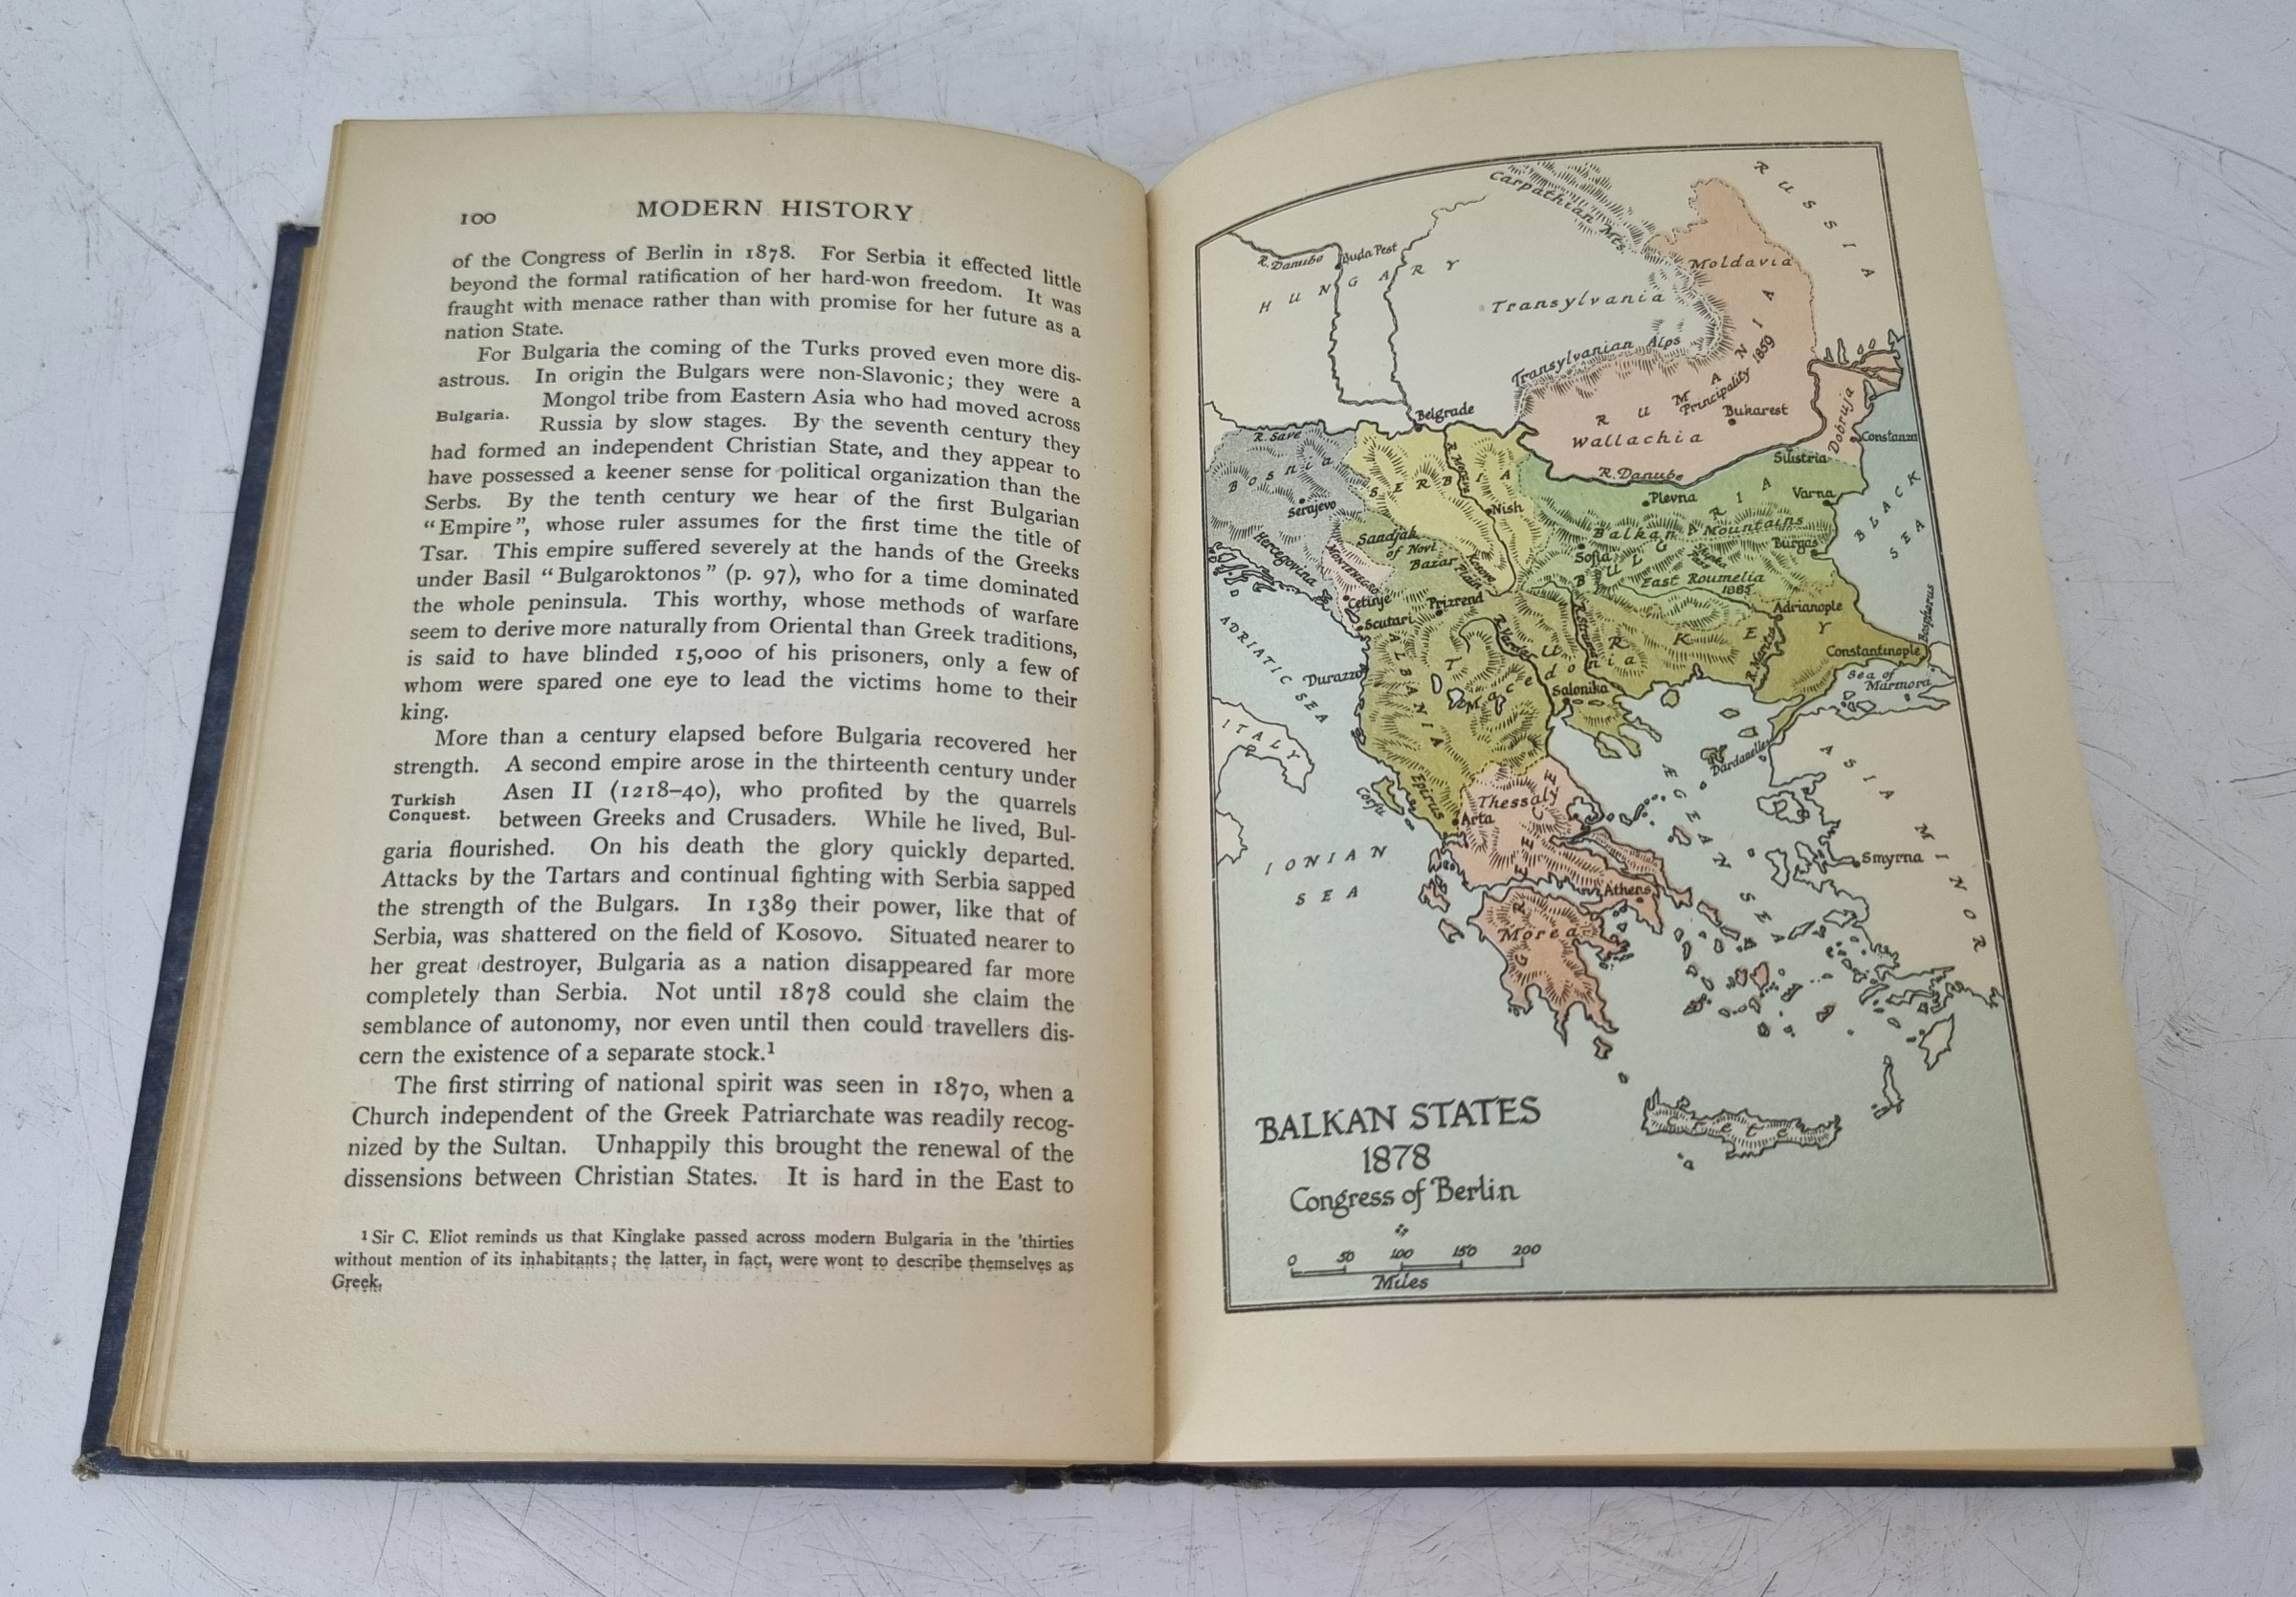 Holland & Britain by Charles Wilson, Journey Without Maps A Travel Book by Graham Greene - Published - Image 16 of 18